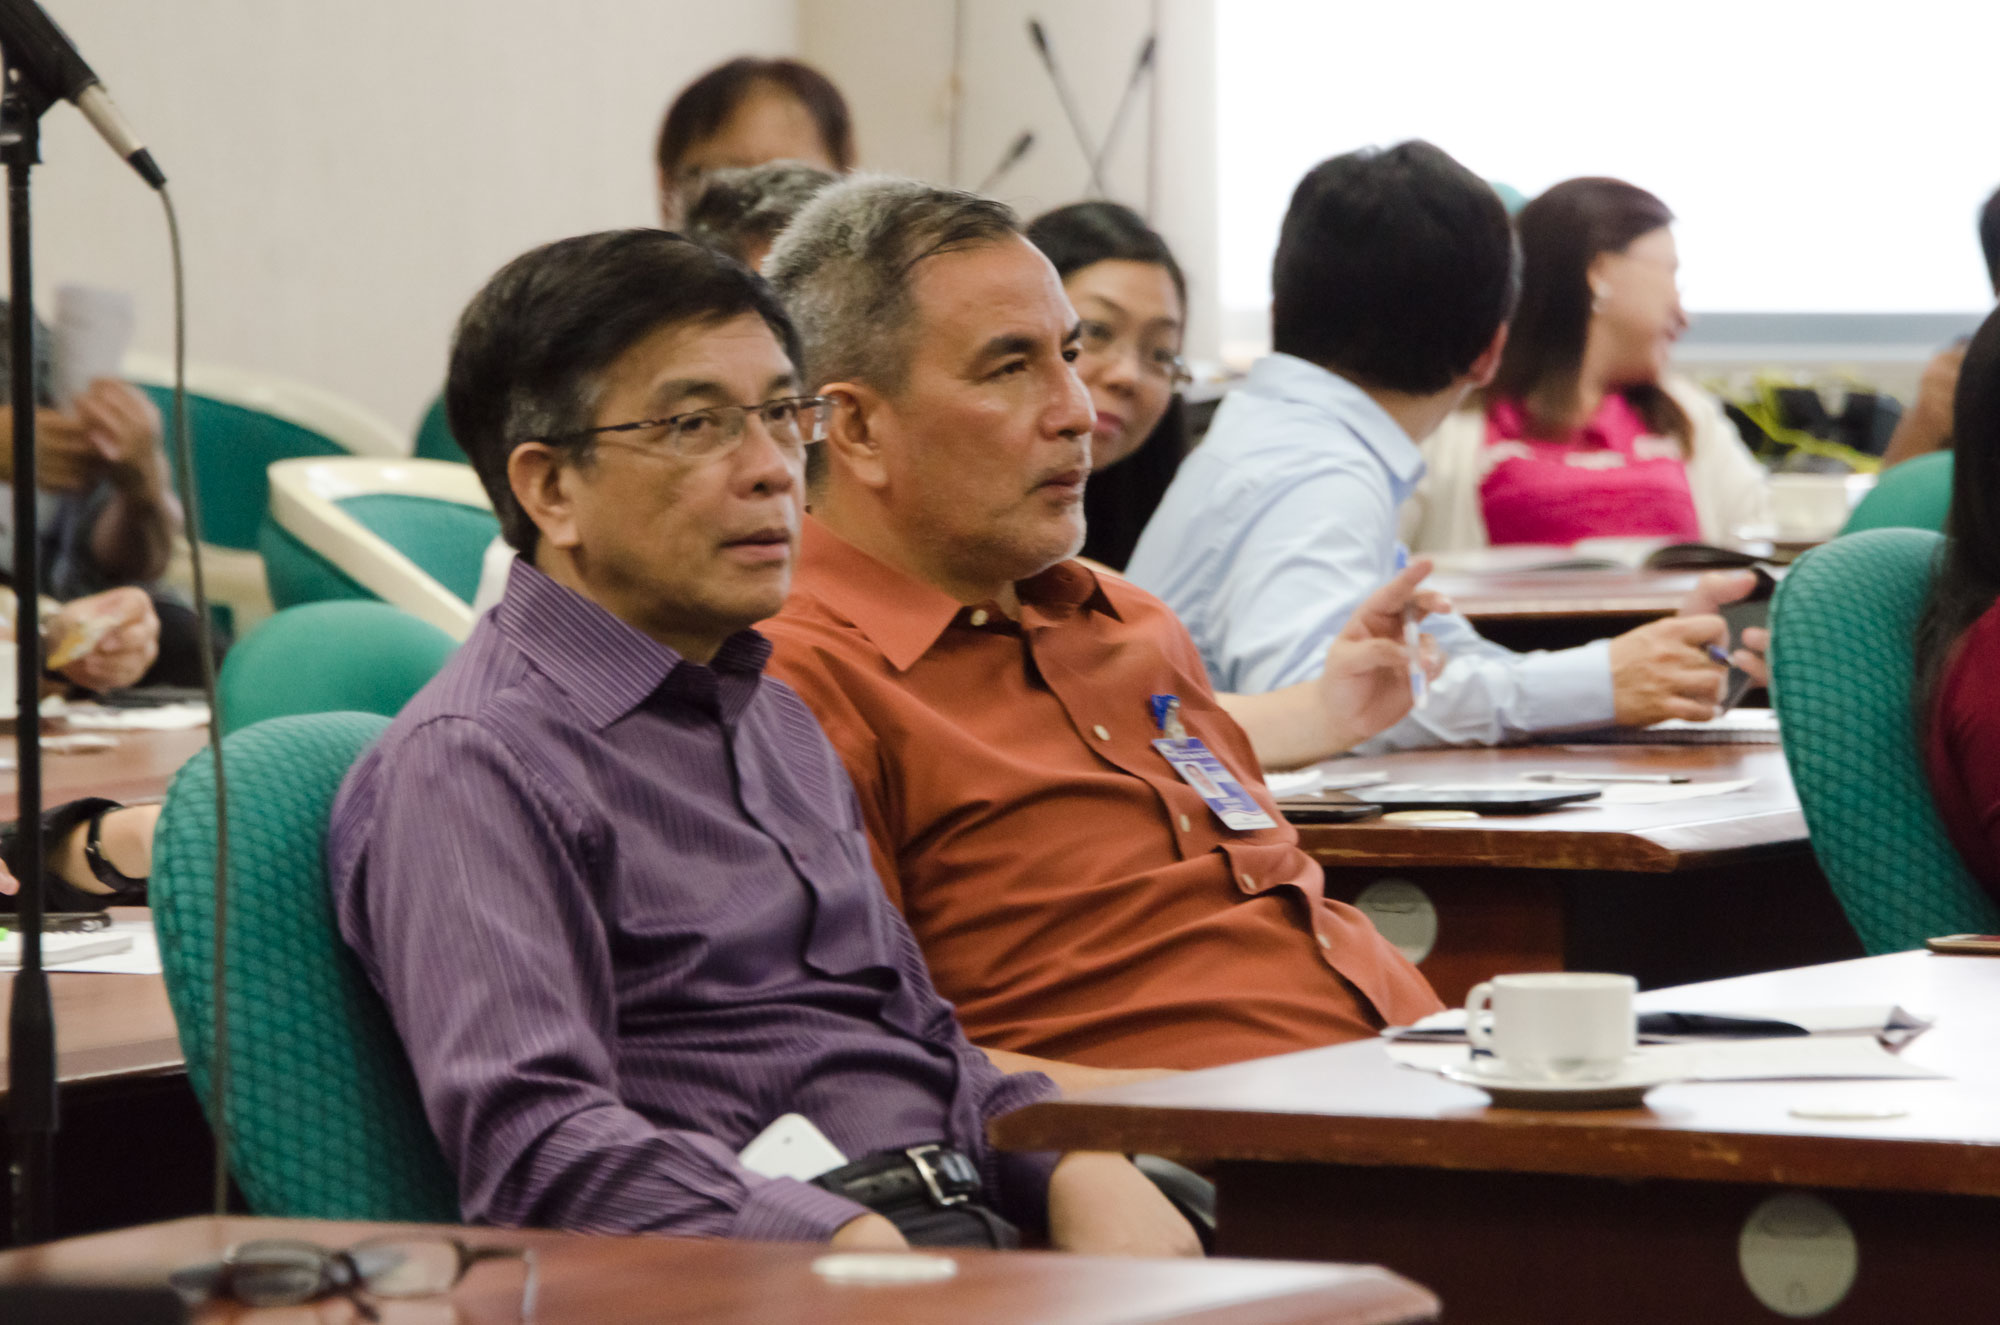 Senate Centennial Lecture Series Assessment Of The Bottom-Up Budgeting Process For FY 2015-GGM_7969.jpg